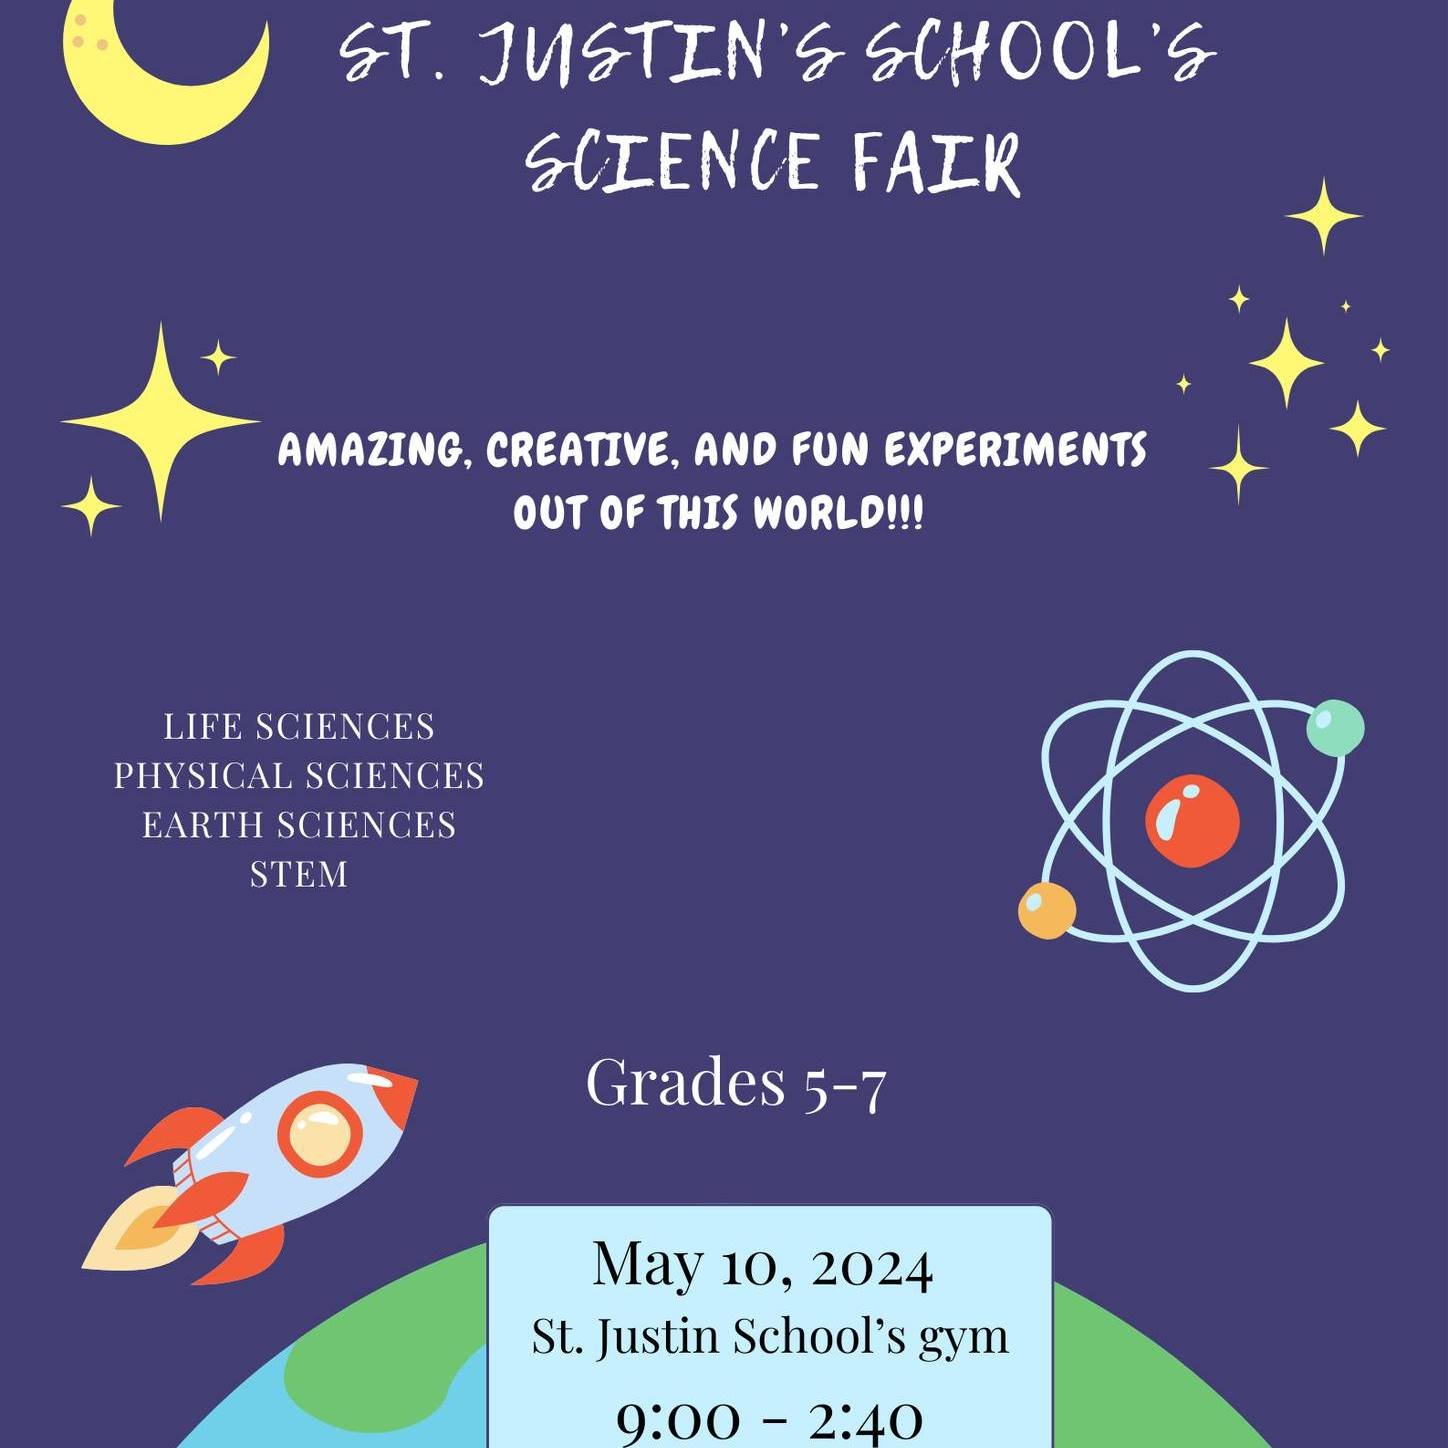 Join us today in the gym for our science fair!